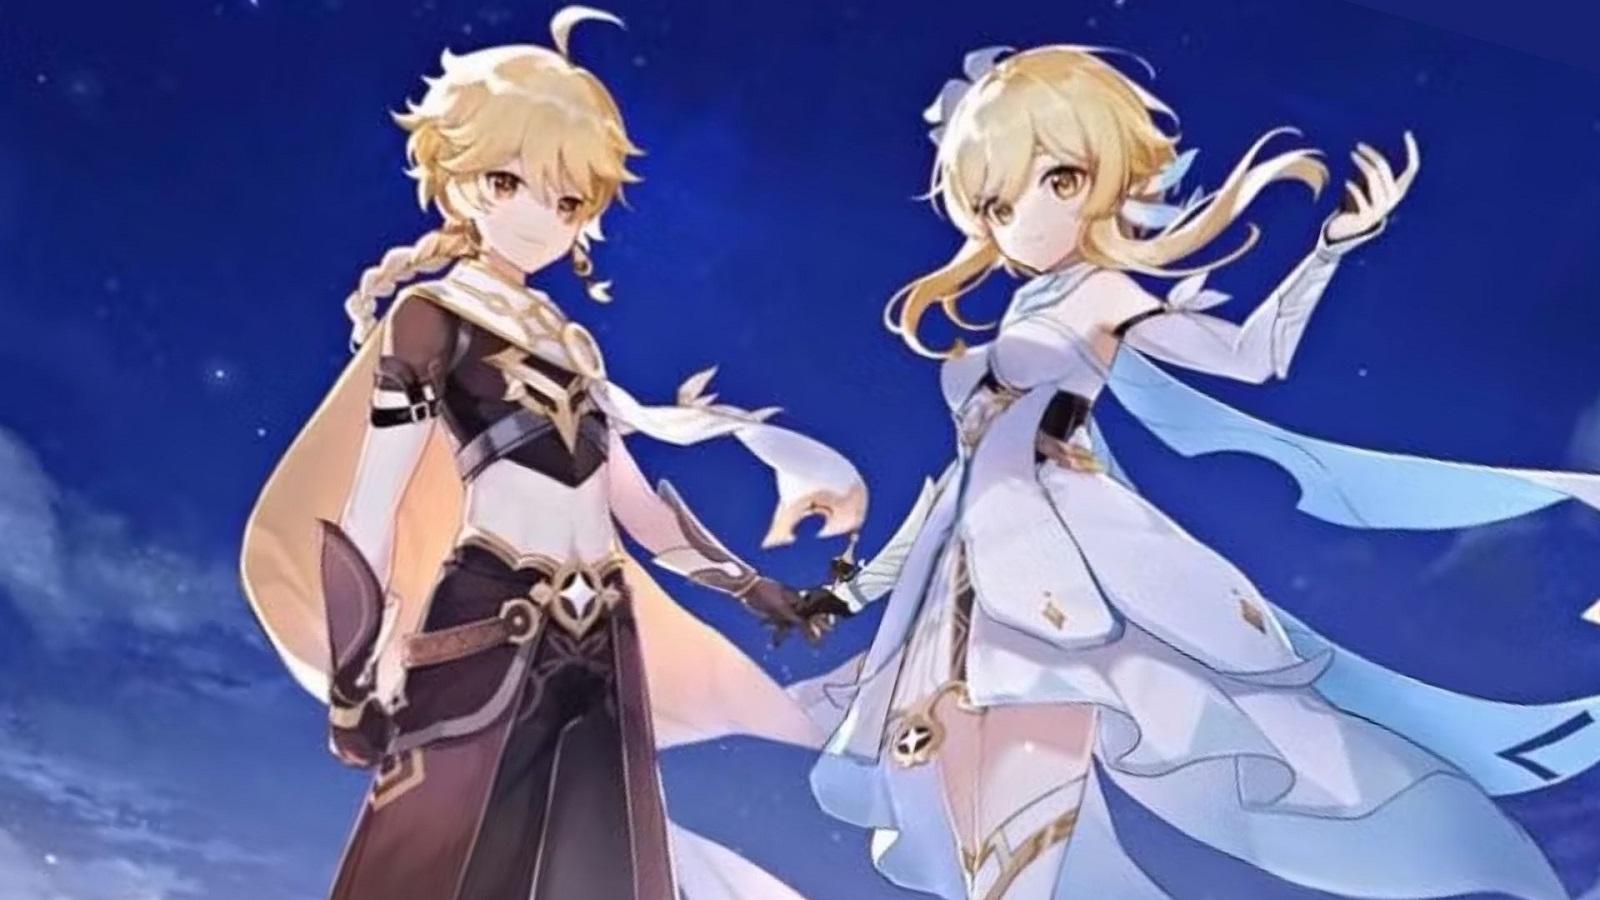 Aether and Lumine standing together